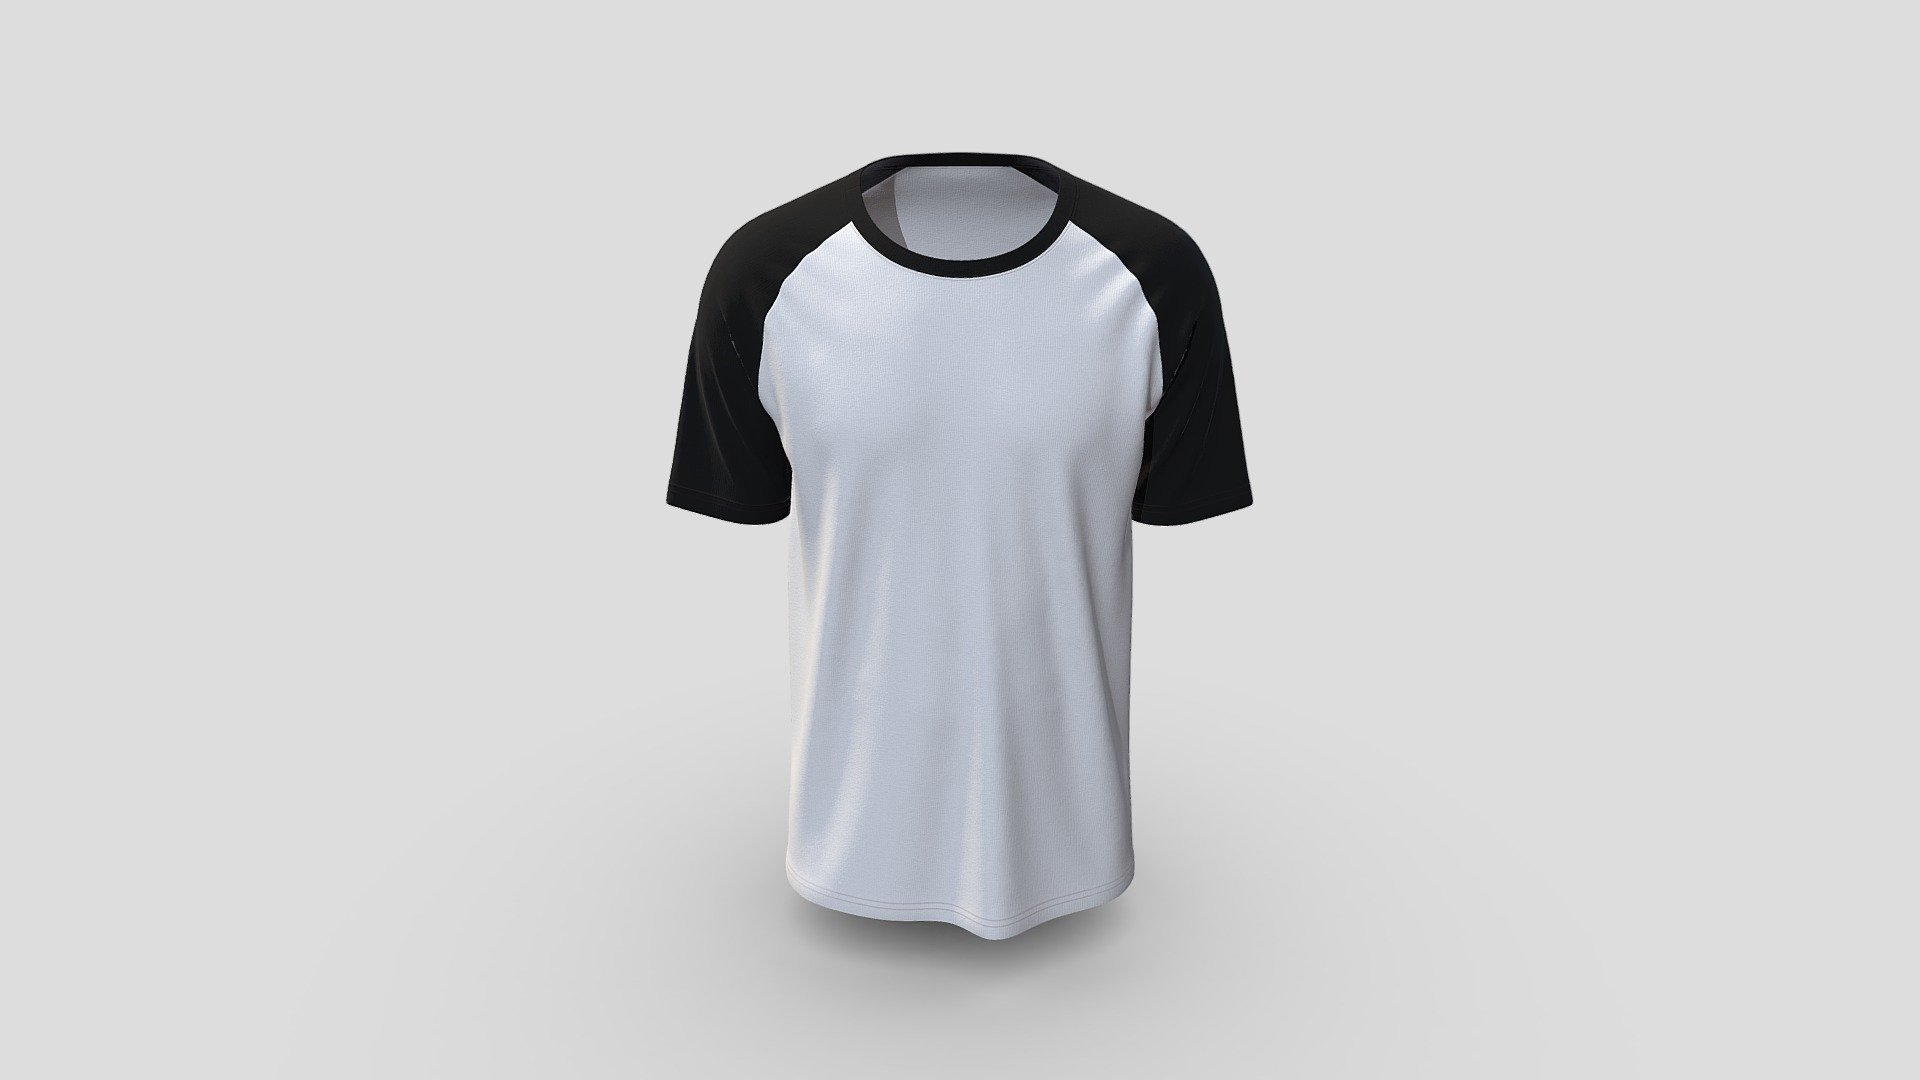 Cloth Title = Comfortable Raglan Sleeve Round Neck T-Shirts Design  

SKU = DG100133 

Category = Unisex 

Product Type = T-Shirt 

Cloth Length = Regular 

Body Fit = Regular Fit 

Occasion = Casual  

Sleeve Style = Raglan Sleeve 


Our Services:

3D Apparel Design.

OBJ,FBX,GLTF Making with High/Low Poly.

Fabric Digitalization.

Mockup making.

3D Teck Pack.

Pattern Making.

2D Illustration.

Cloth Animation and 360 Spin Video.


Contact us:- 

Email: info@digitalfashionwear.com 

Website: https://digitalfashionwear.com 


We designed all the types of cloth specially focused on product visualization, e-commerce, fitting, and production. 

We will design: 

T-shirts 

Polo shirts 

Hoodies 

Sweatshirt 

Jackets 

Shirts 

TankTops 

Trousers 

Bras 

Underwear 

Blazer 

Aprons 

Leggings 

and All Fashion items. 





Our goal is to make sure what we provide you, meets your demand 3d model